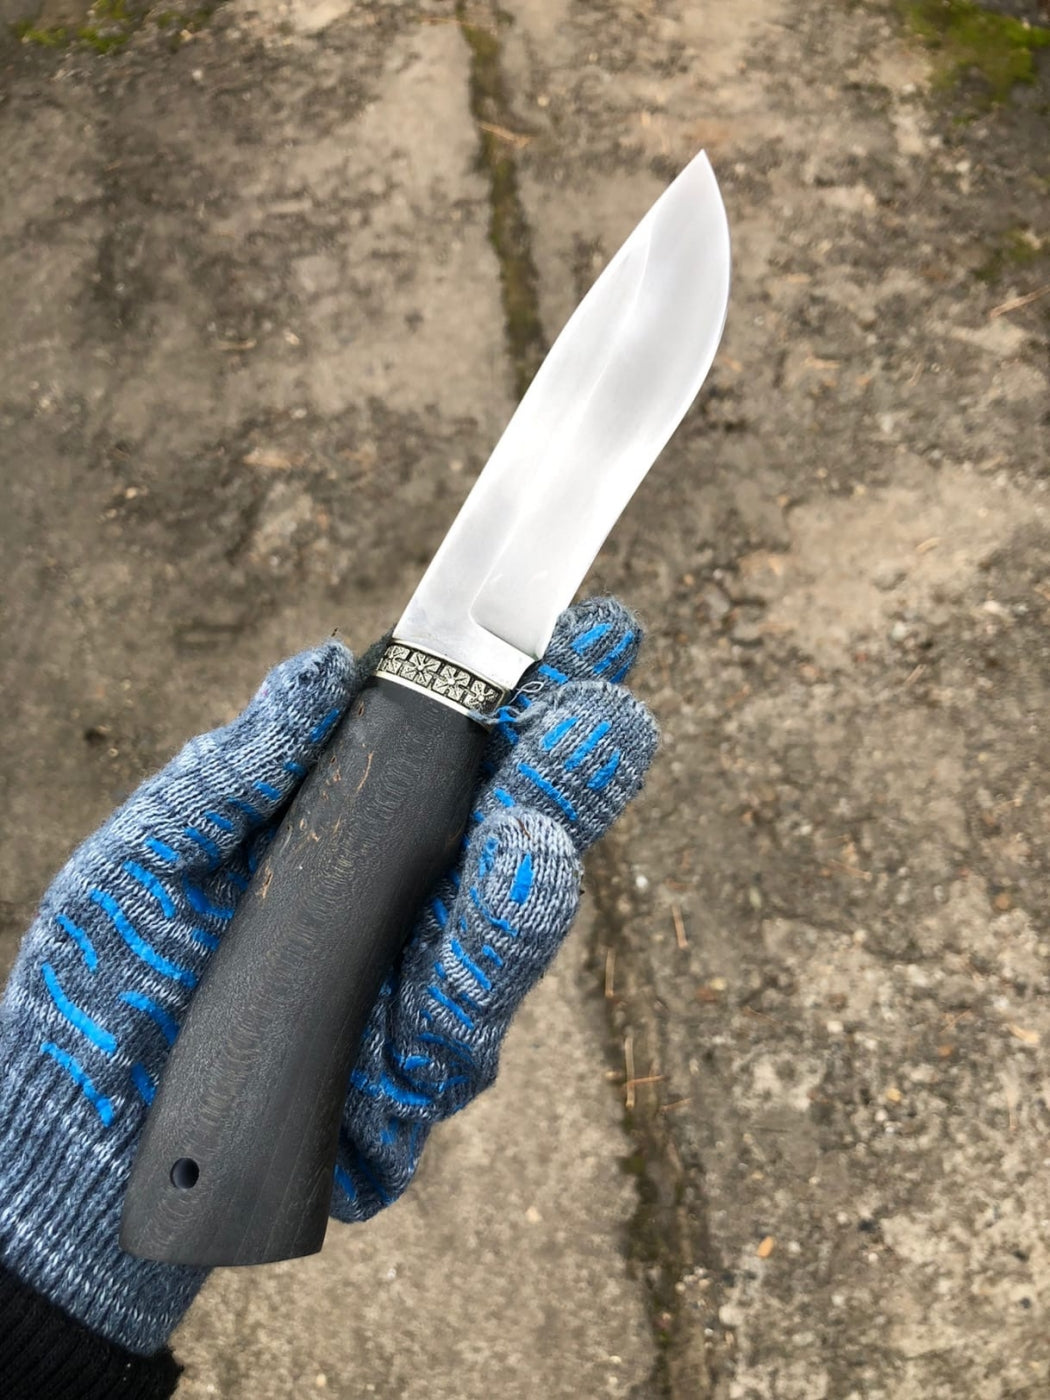 Combat Hunting Knife with Ferrule